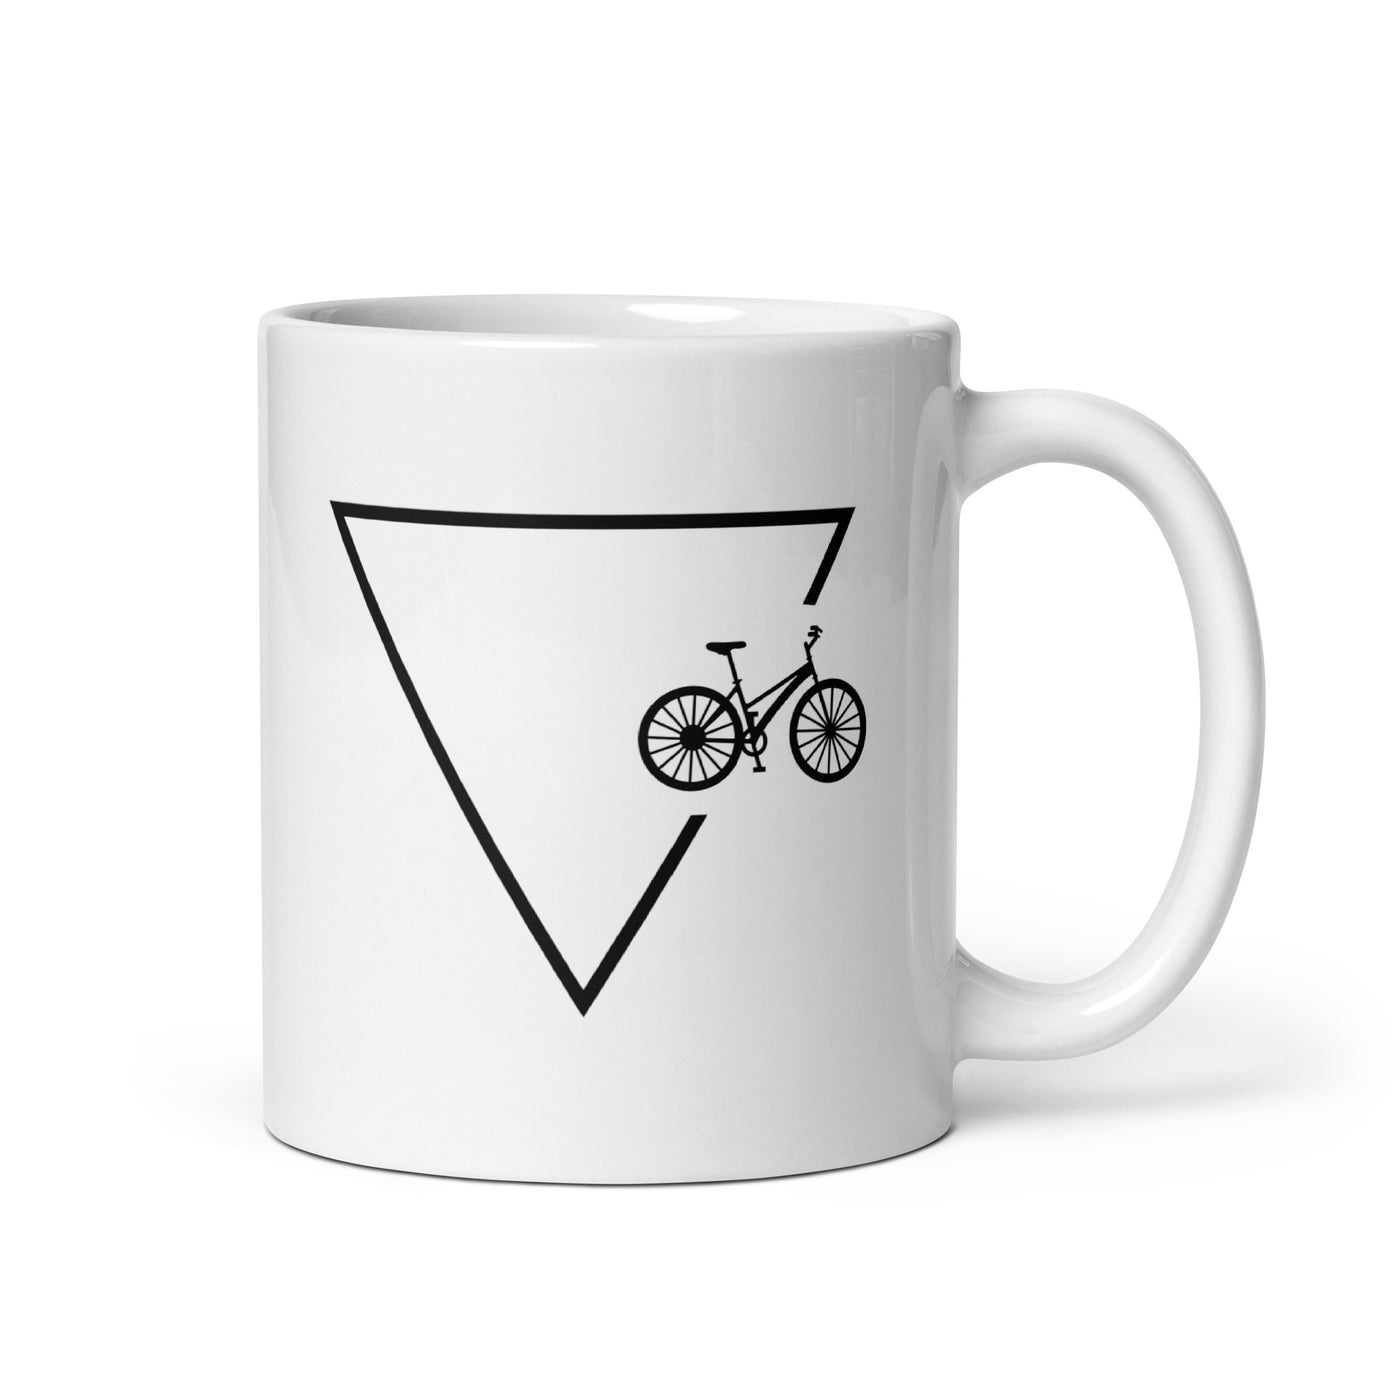 Triangle 1 And Bicycle - Tasse fahrrad